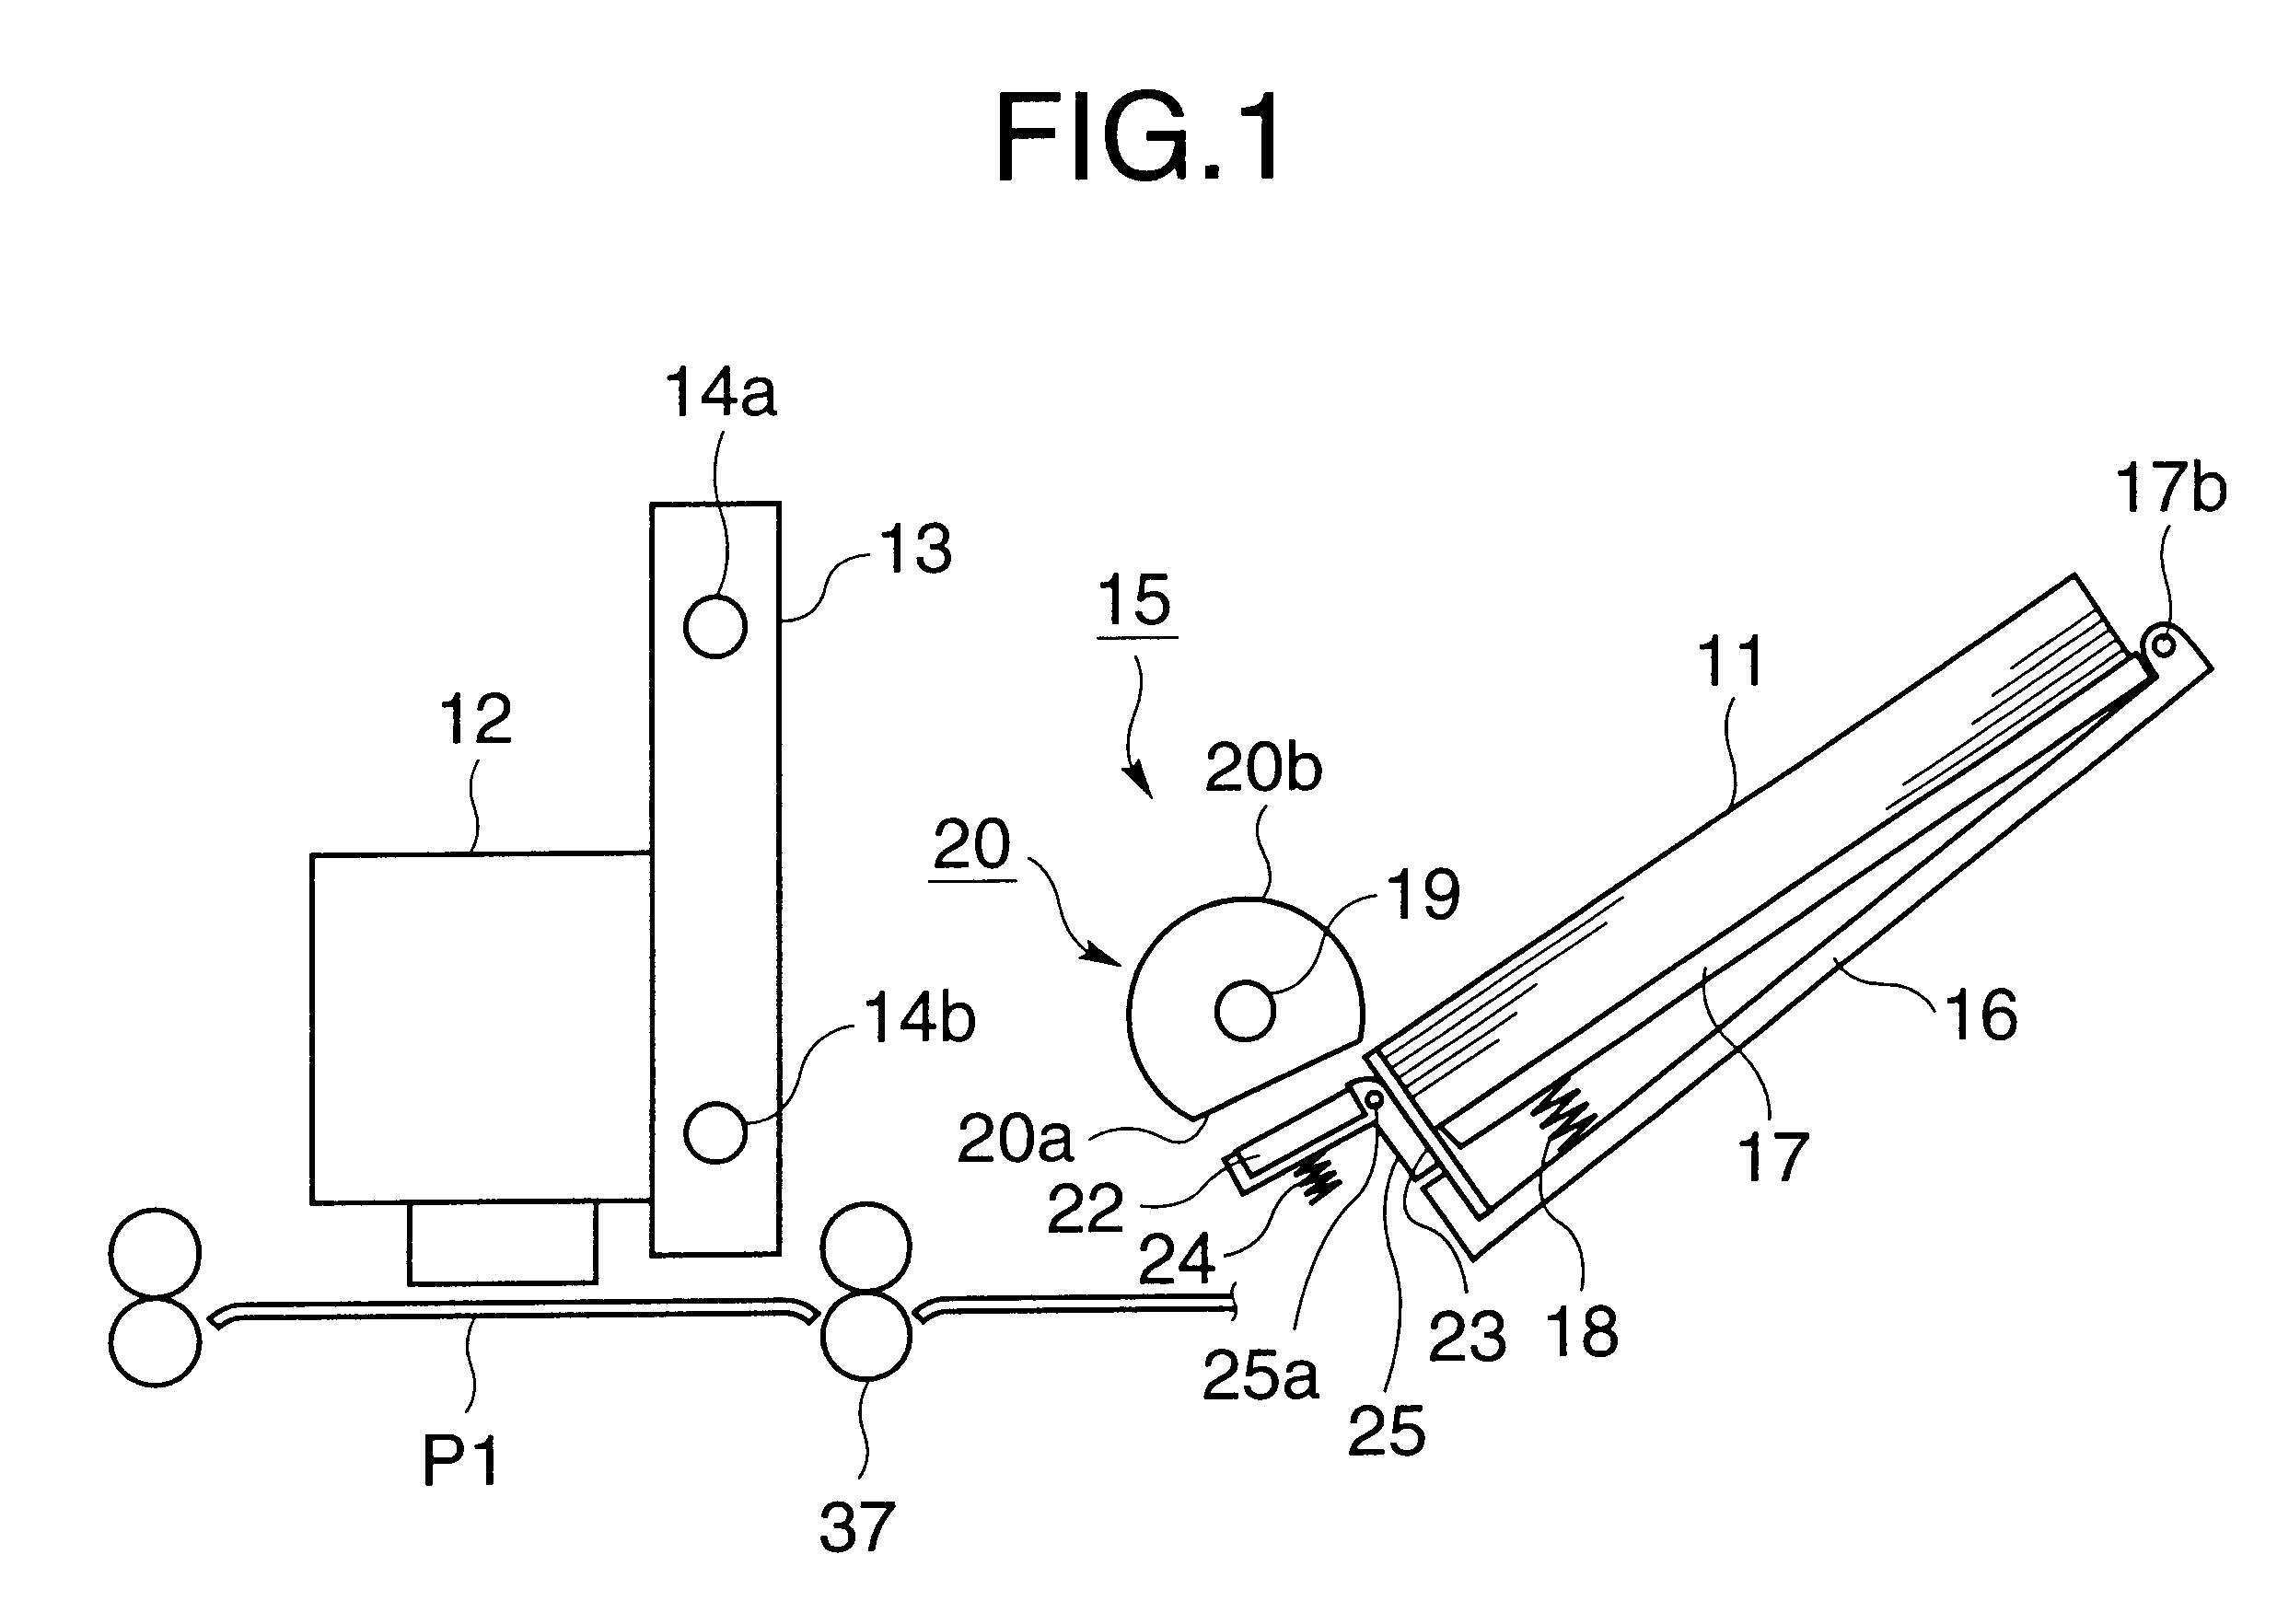 Paper-feeding apparatus and method of feeding paper